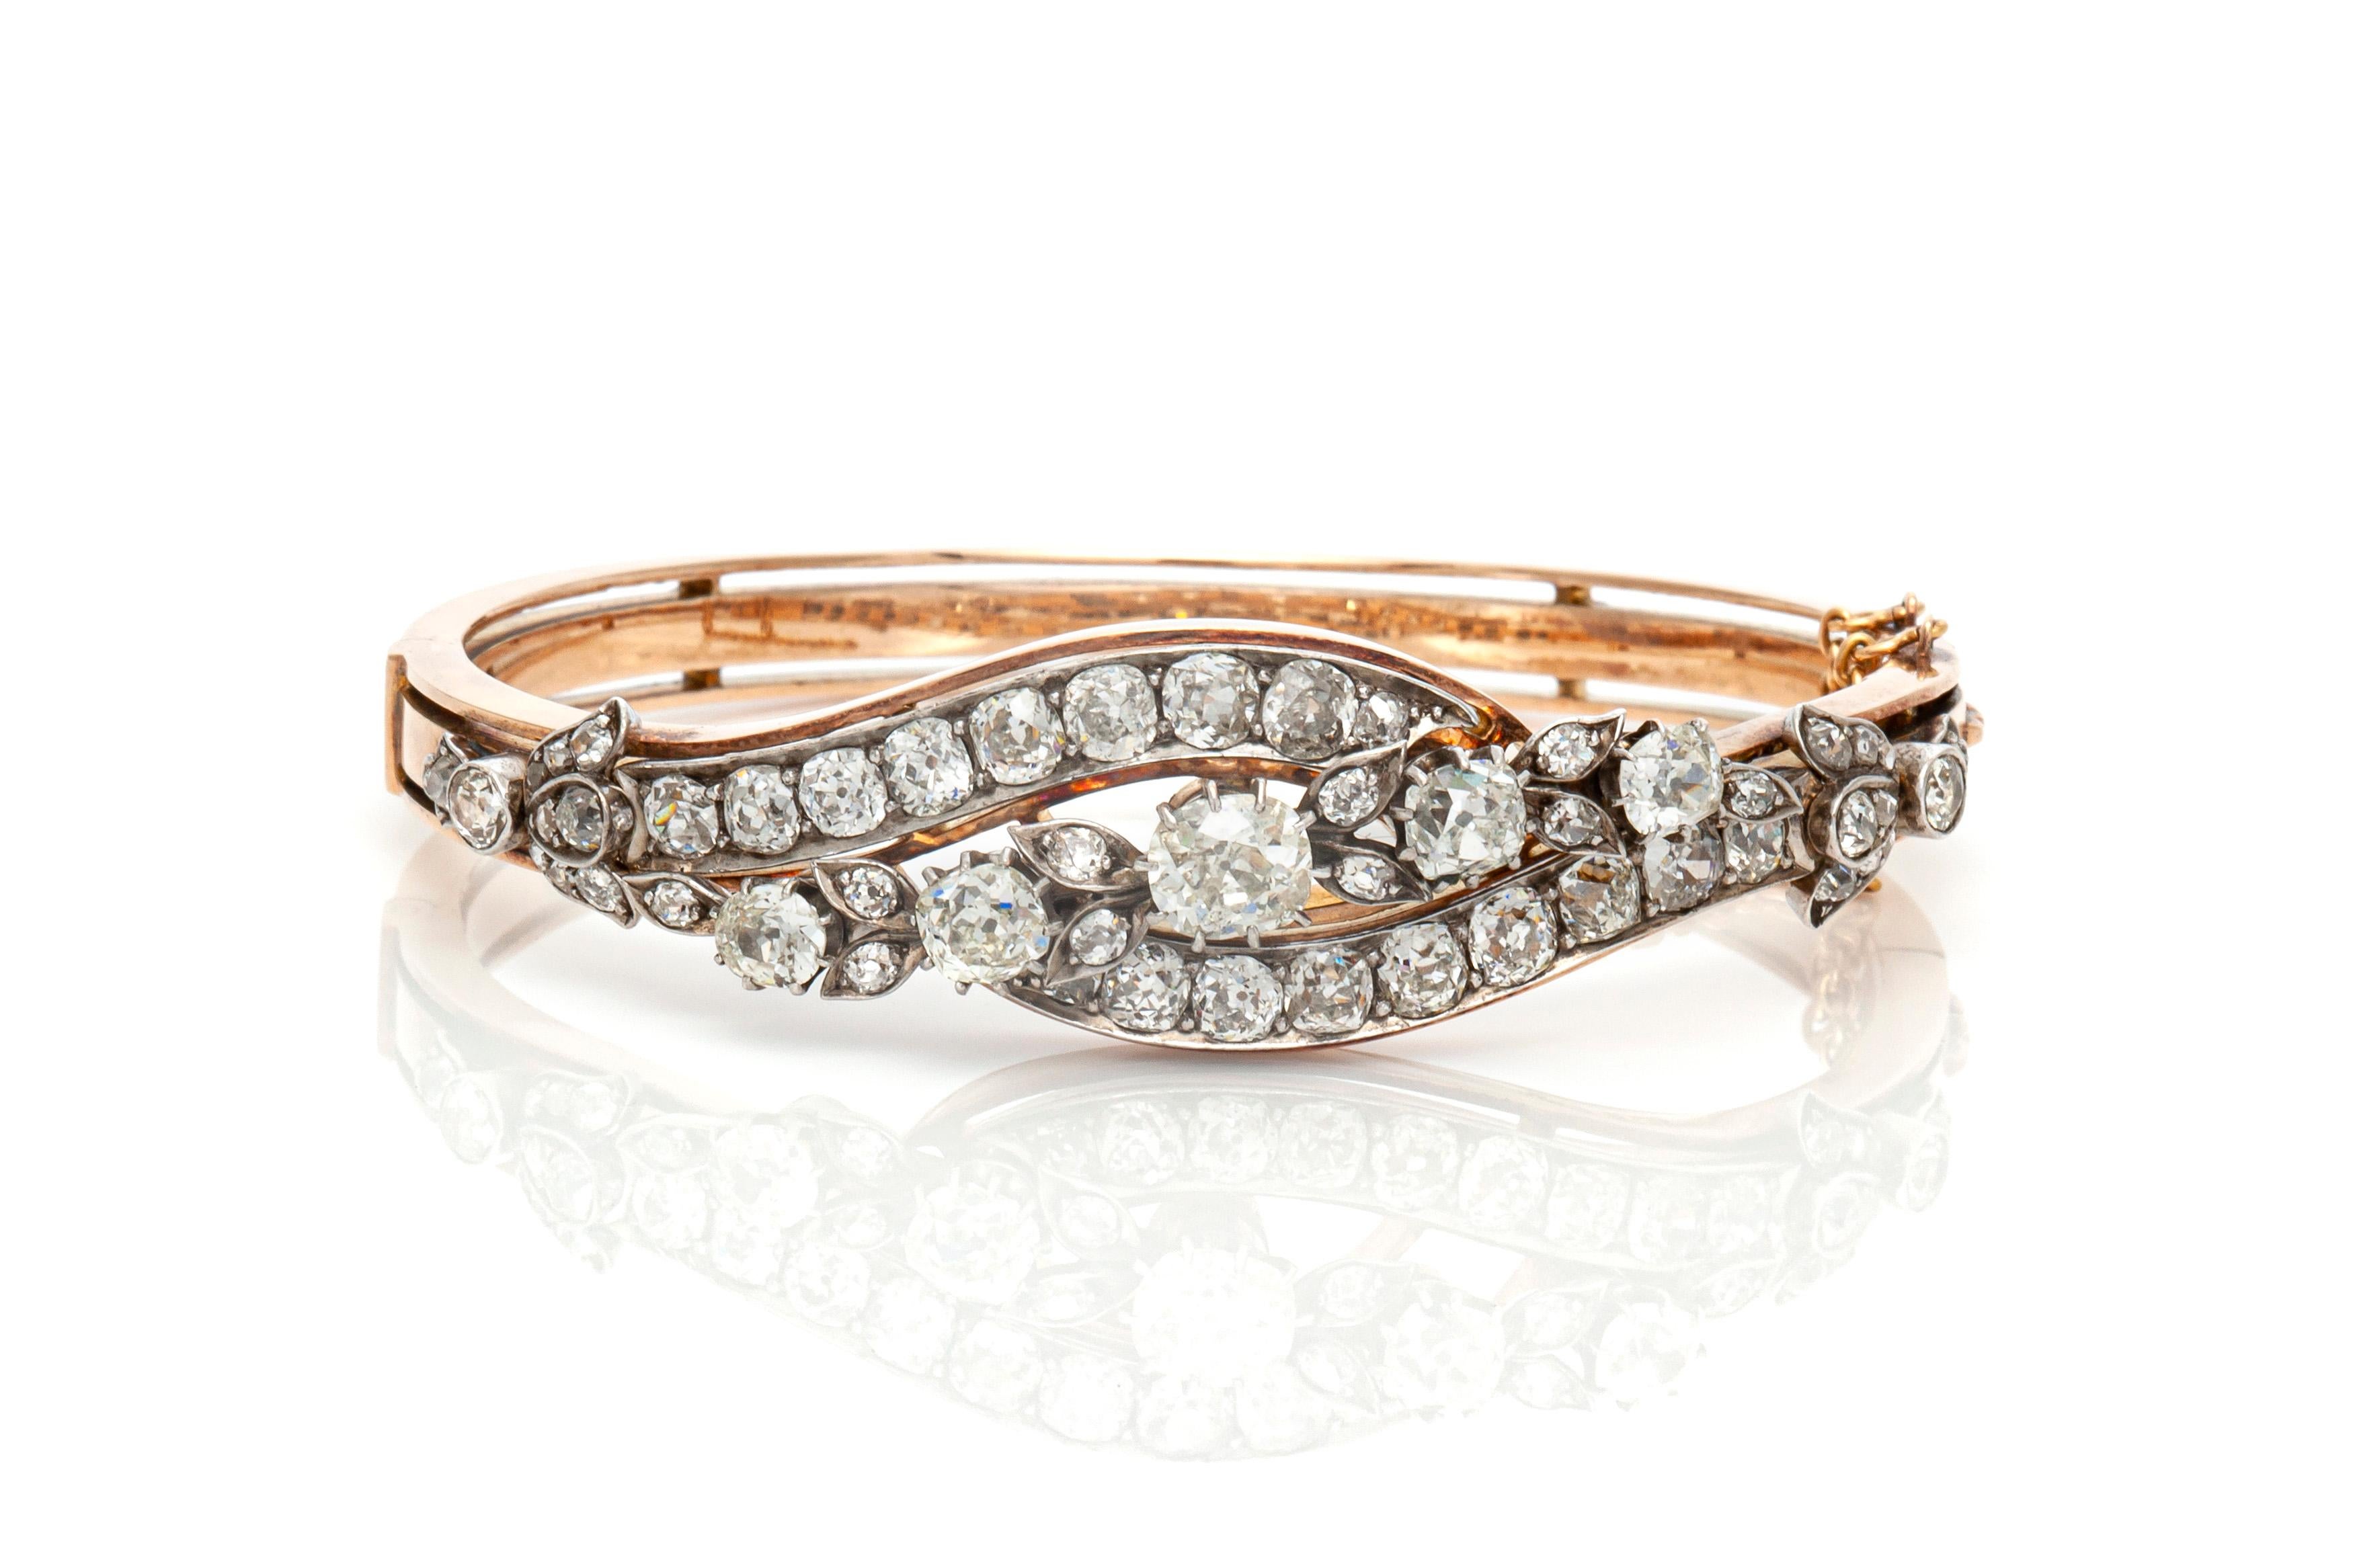 Antique bracelet, finely crafted in 14k gold with diamonds weighing approximately a total of 10.00 carat. Circa 1900.s.